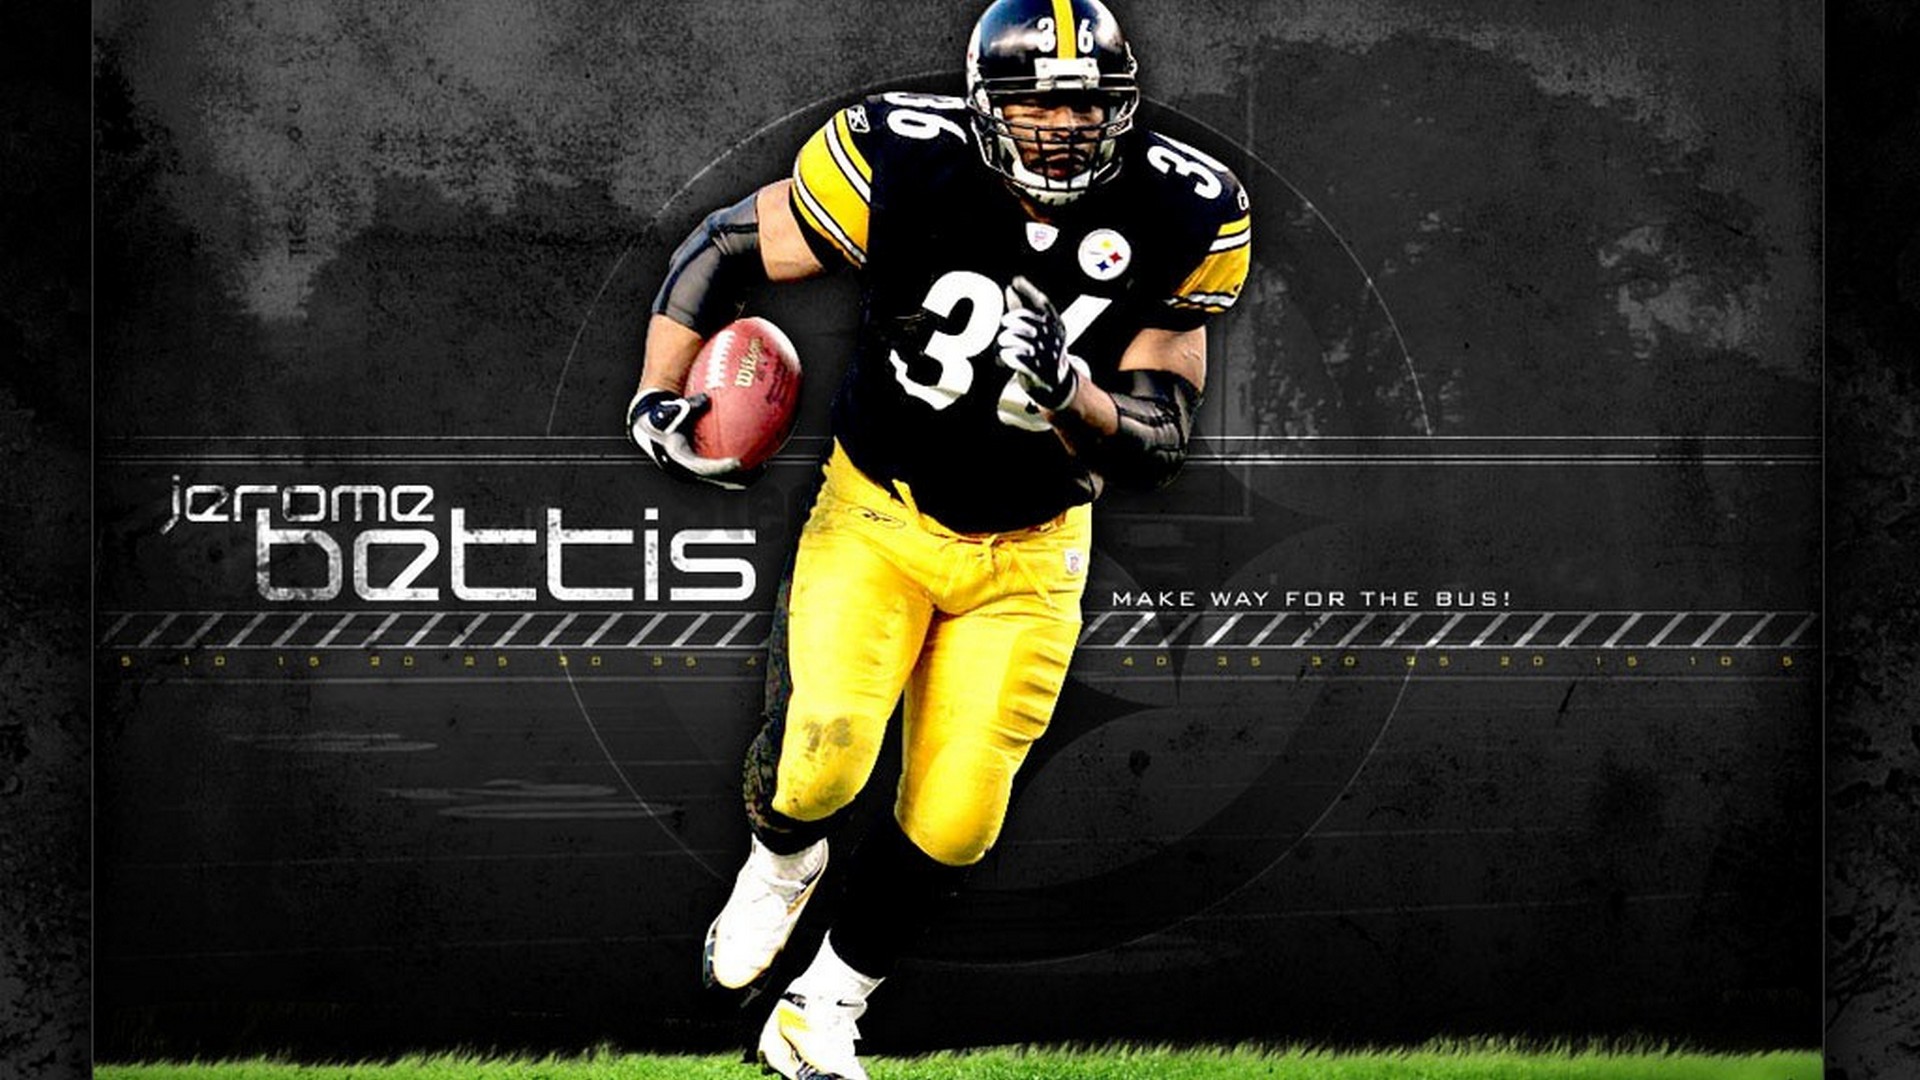 HD Steelers Football Backgrounds With Resolution 1920X1080 pixel. You can make this wallpaper for your Mac or Windows Desktop Background, iPhone, Android or Tablet and another Smartphone device for free